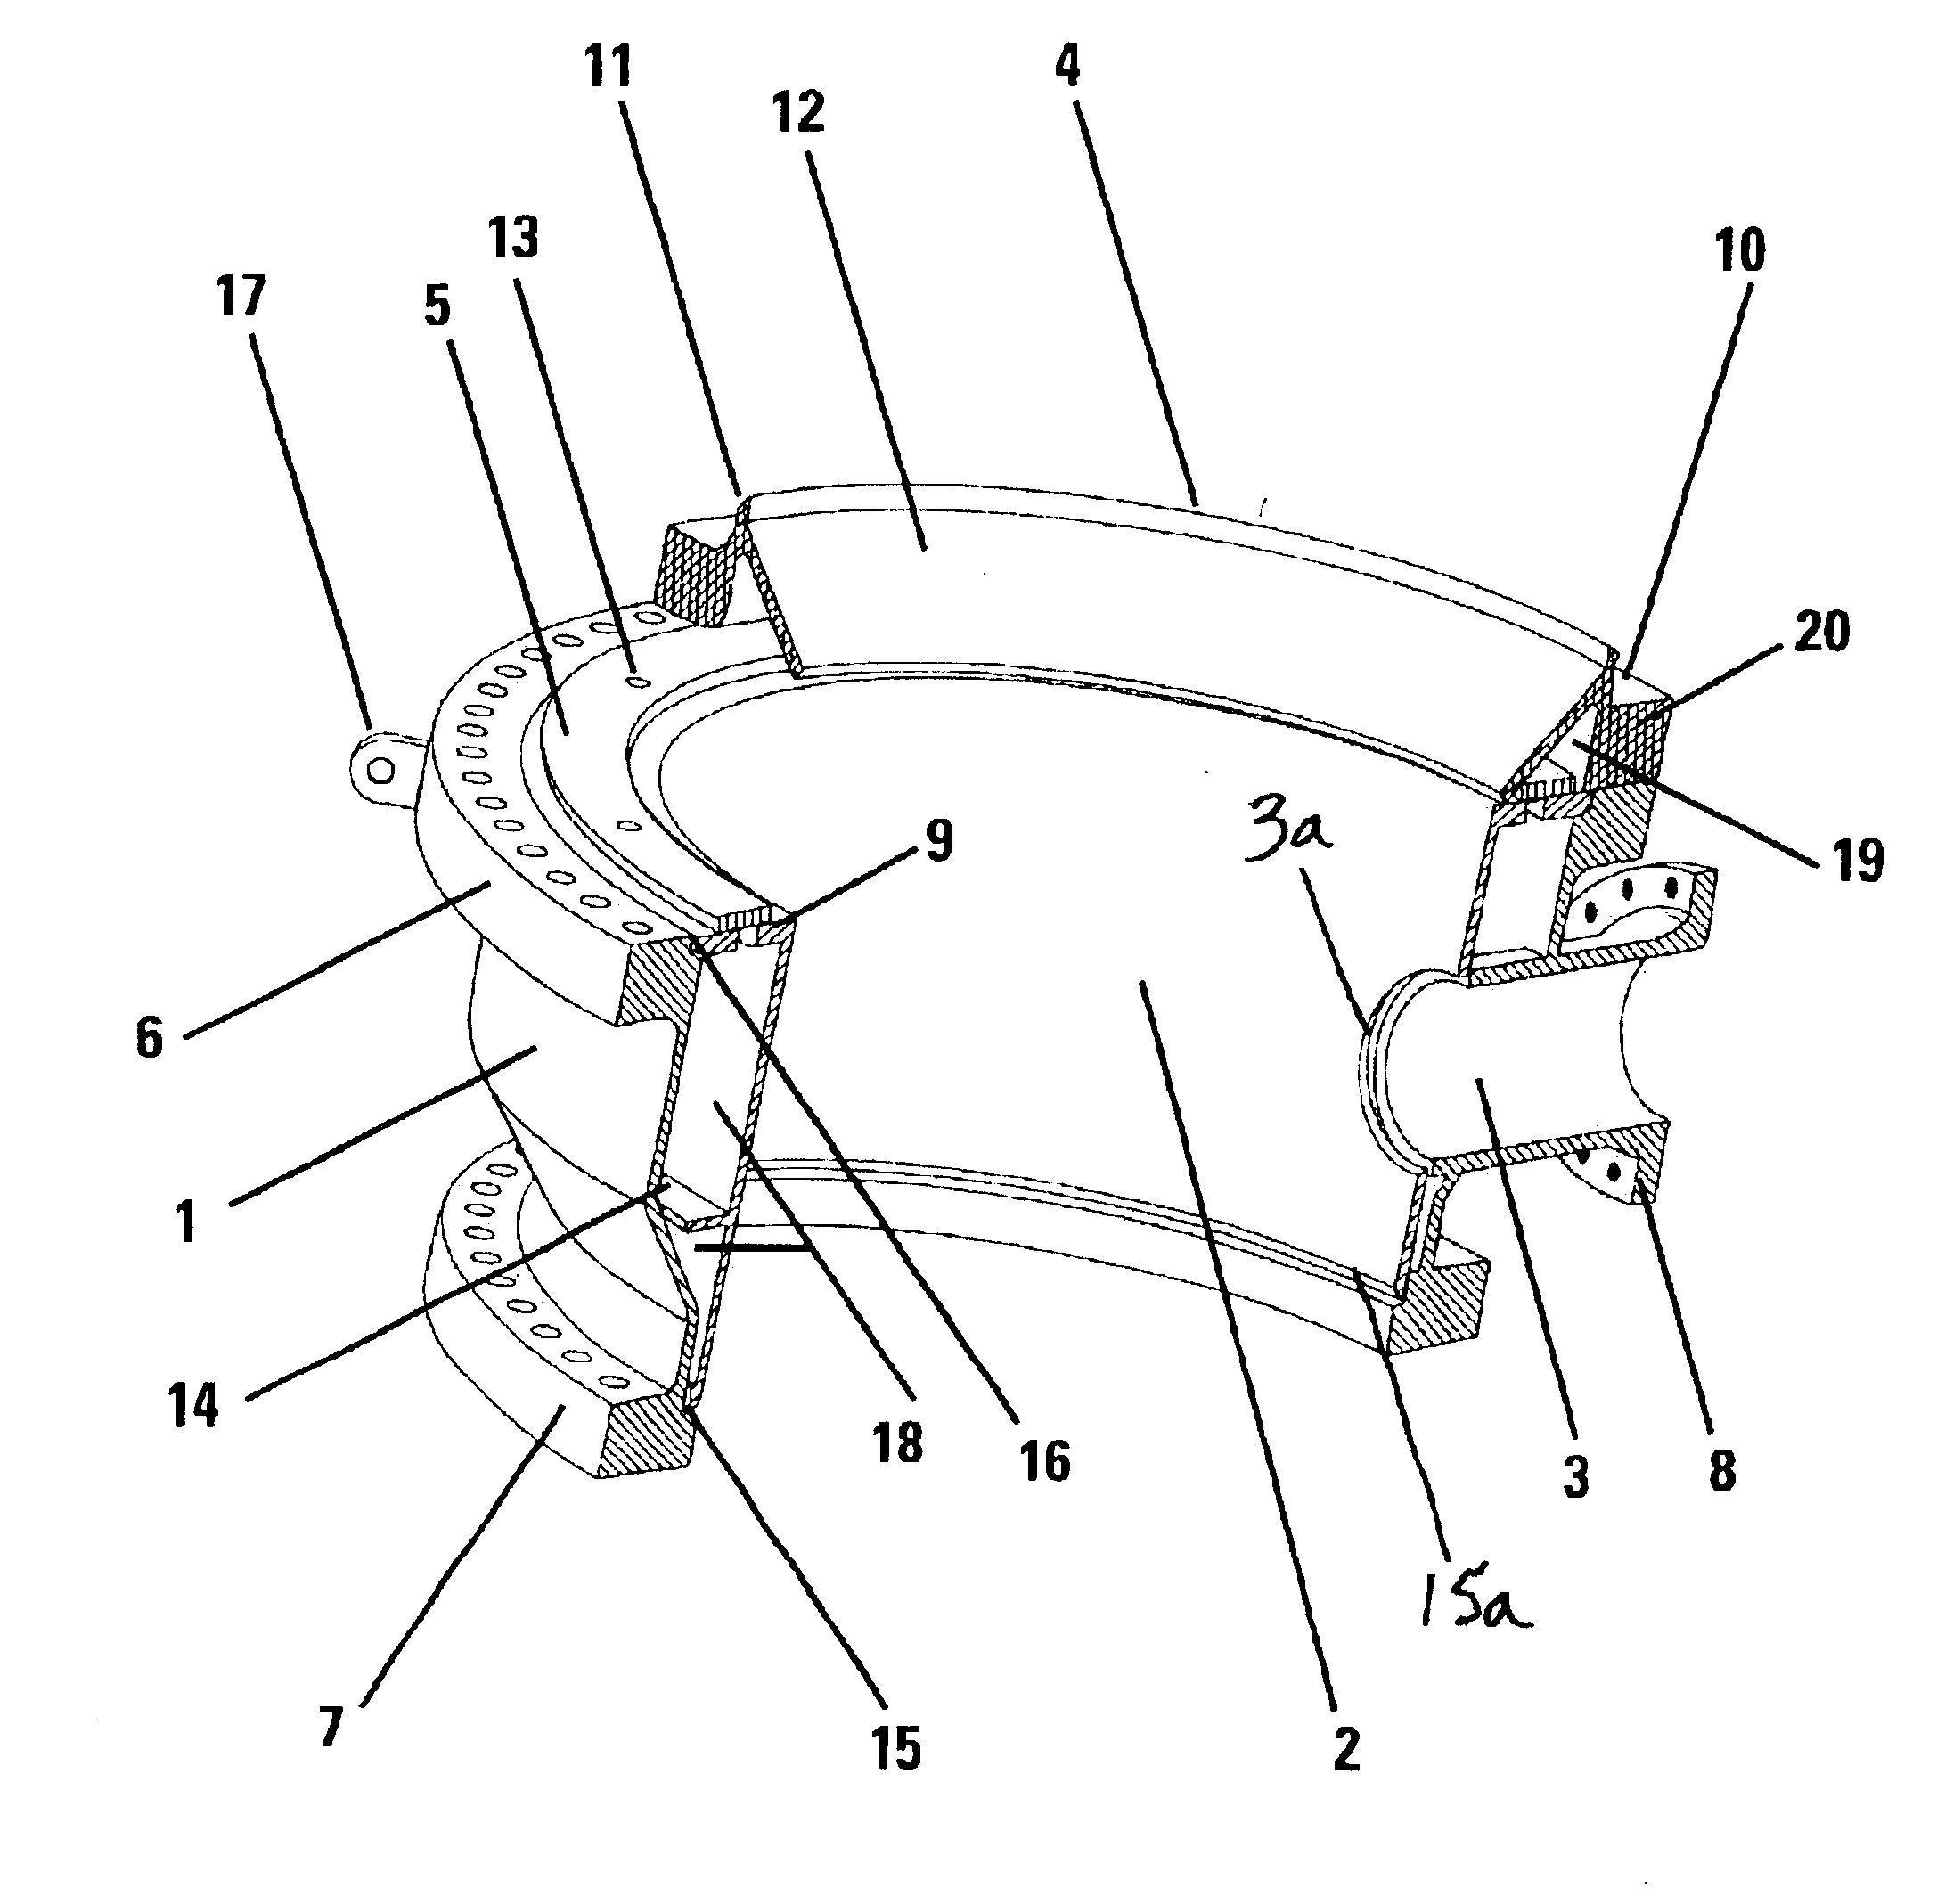 Insulated transition spool apparatus